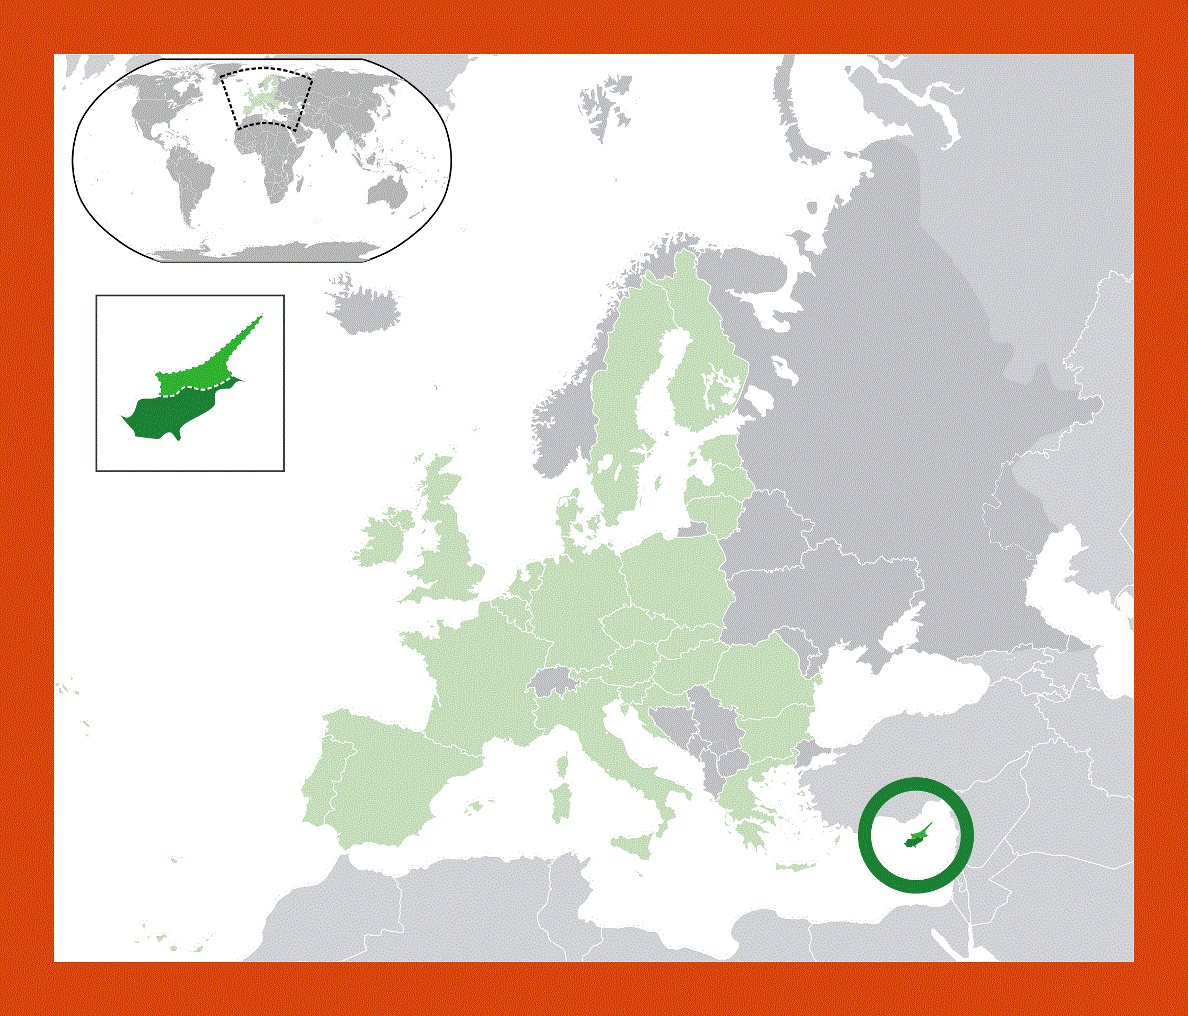 Location map of Cyprus in EU